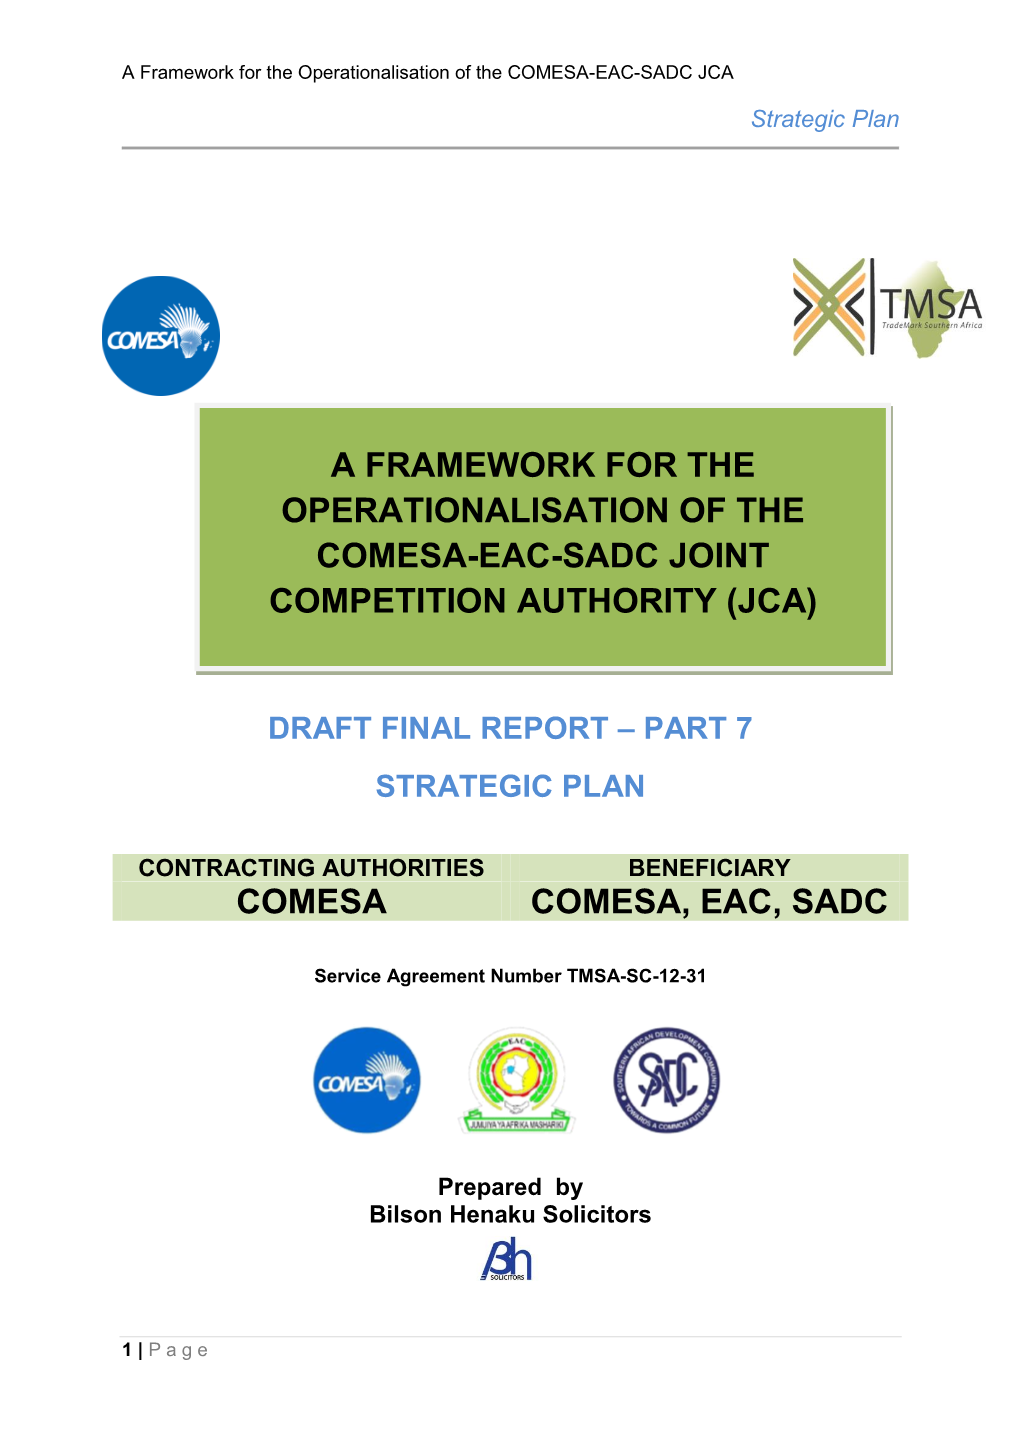 A Framework for the Operationalisation of the Comesa-Eac-Sadc Joint Competition Authority (Jca)